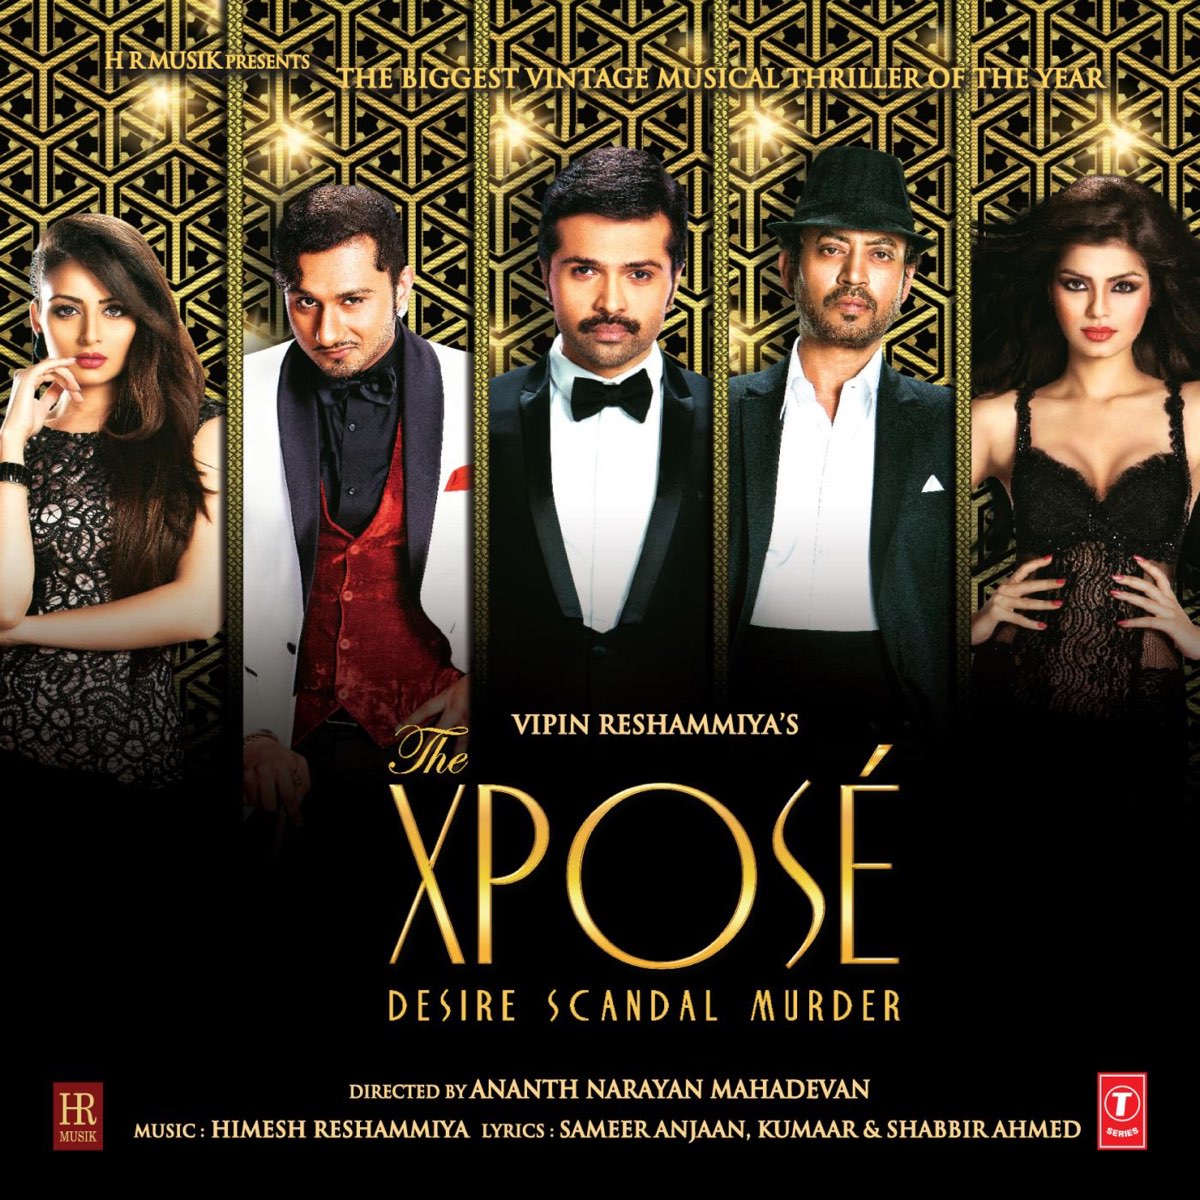 The xpose movie songs free download adobe flash cs5 free download full version for windows xp